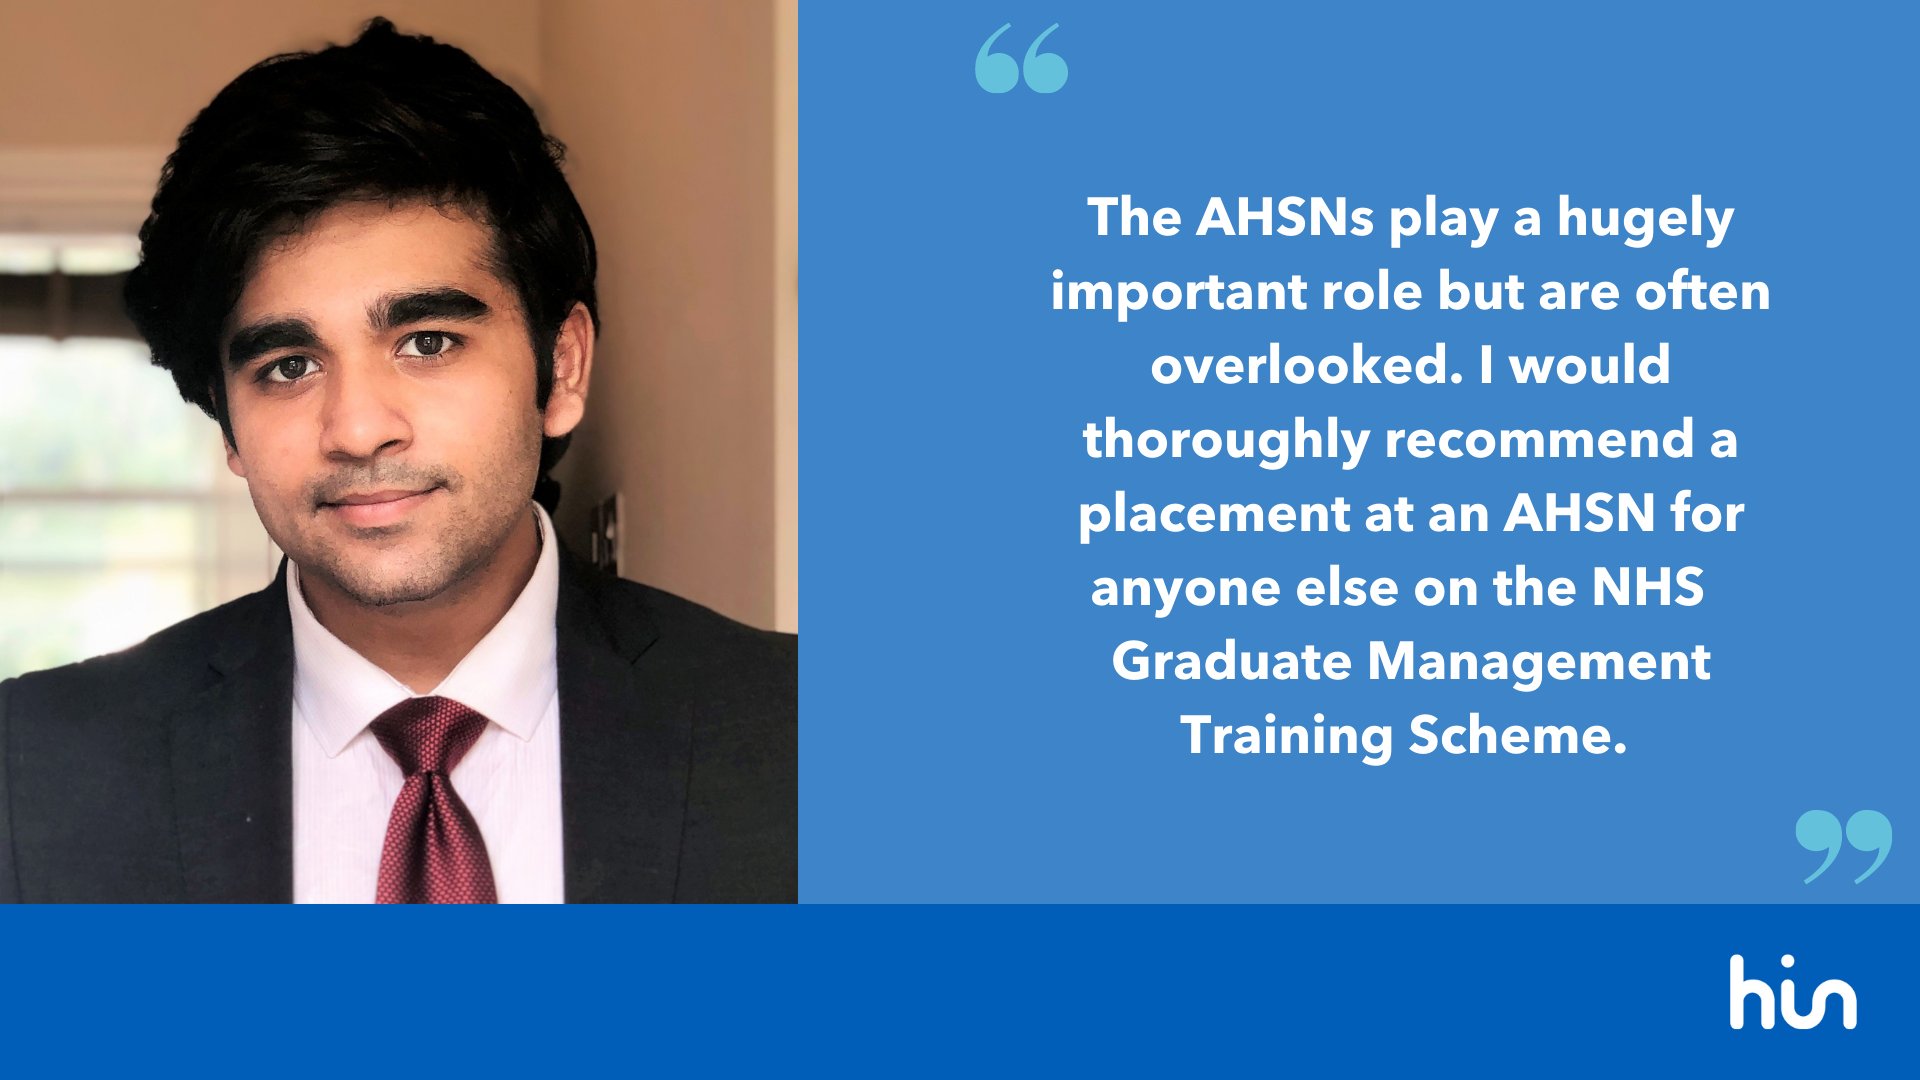 The AHSNs play a hugely important role but are often overlooked. I would thoroughly recommend a placement at an AHSN for anyone else on the NHS Graduate Management Training Scheme.